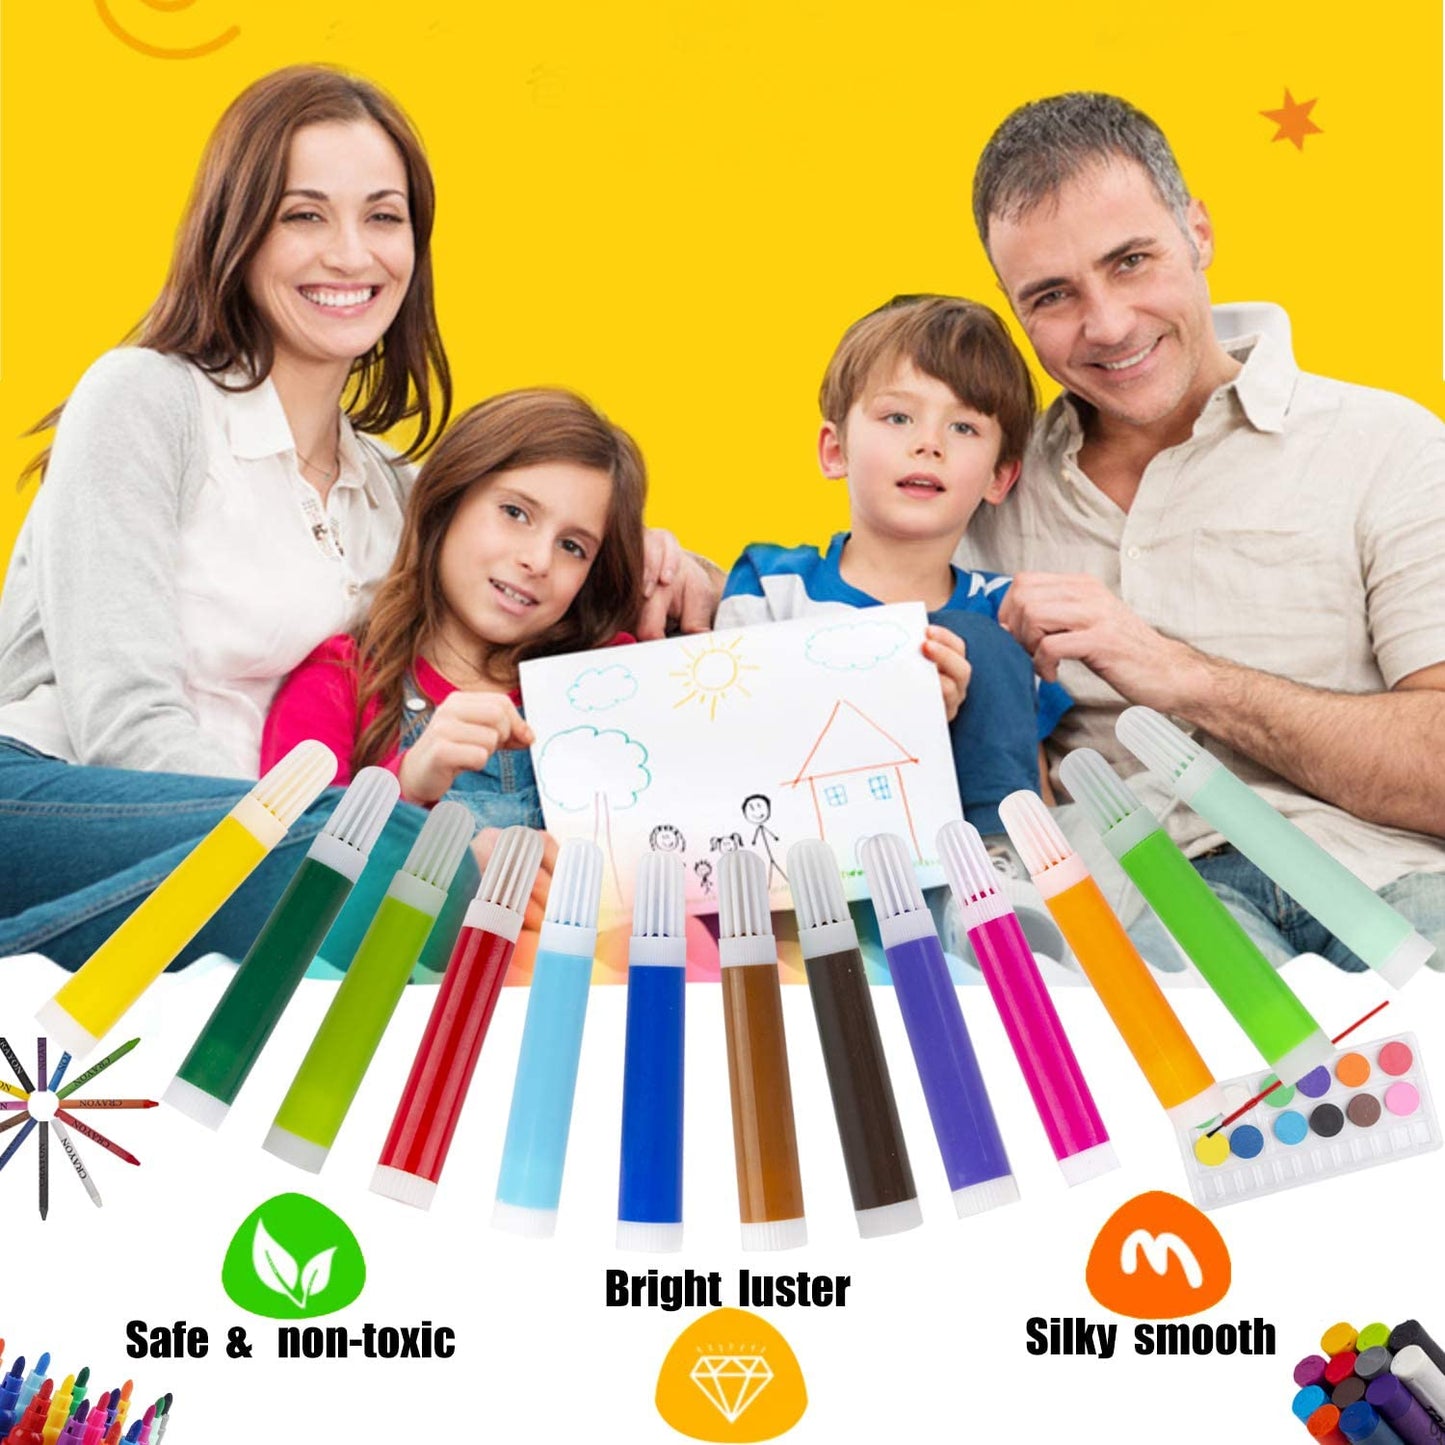 KINSPORY 212 PCS Portable Inspiration & Creativity Coloring Art Set Painting & Drawing Supplies Kit, Markers, Oil Pastels, Crayons, Colour Pencils, Watercolour Cakes, Palette, Brush, Drawing Papers